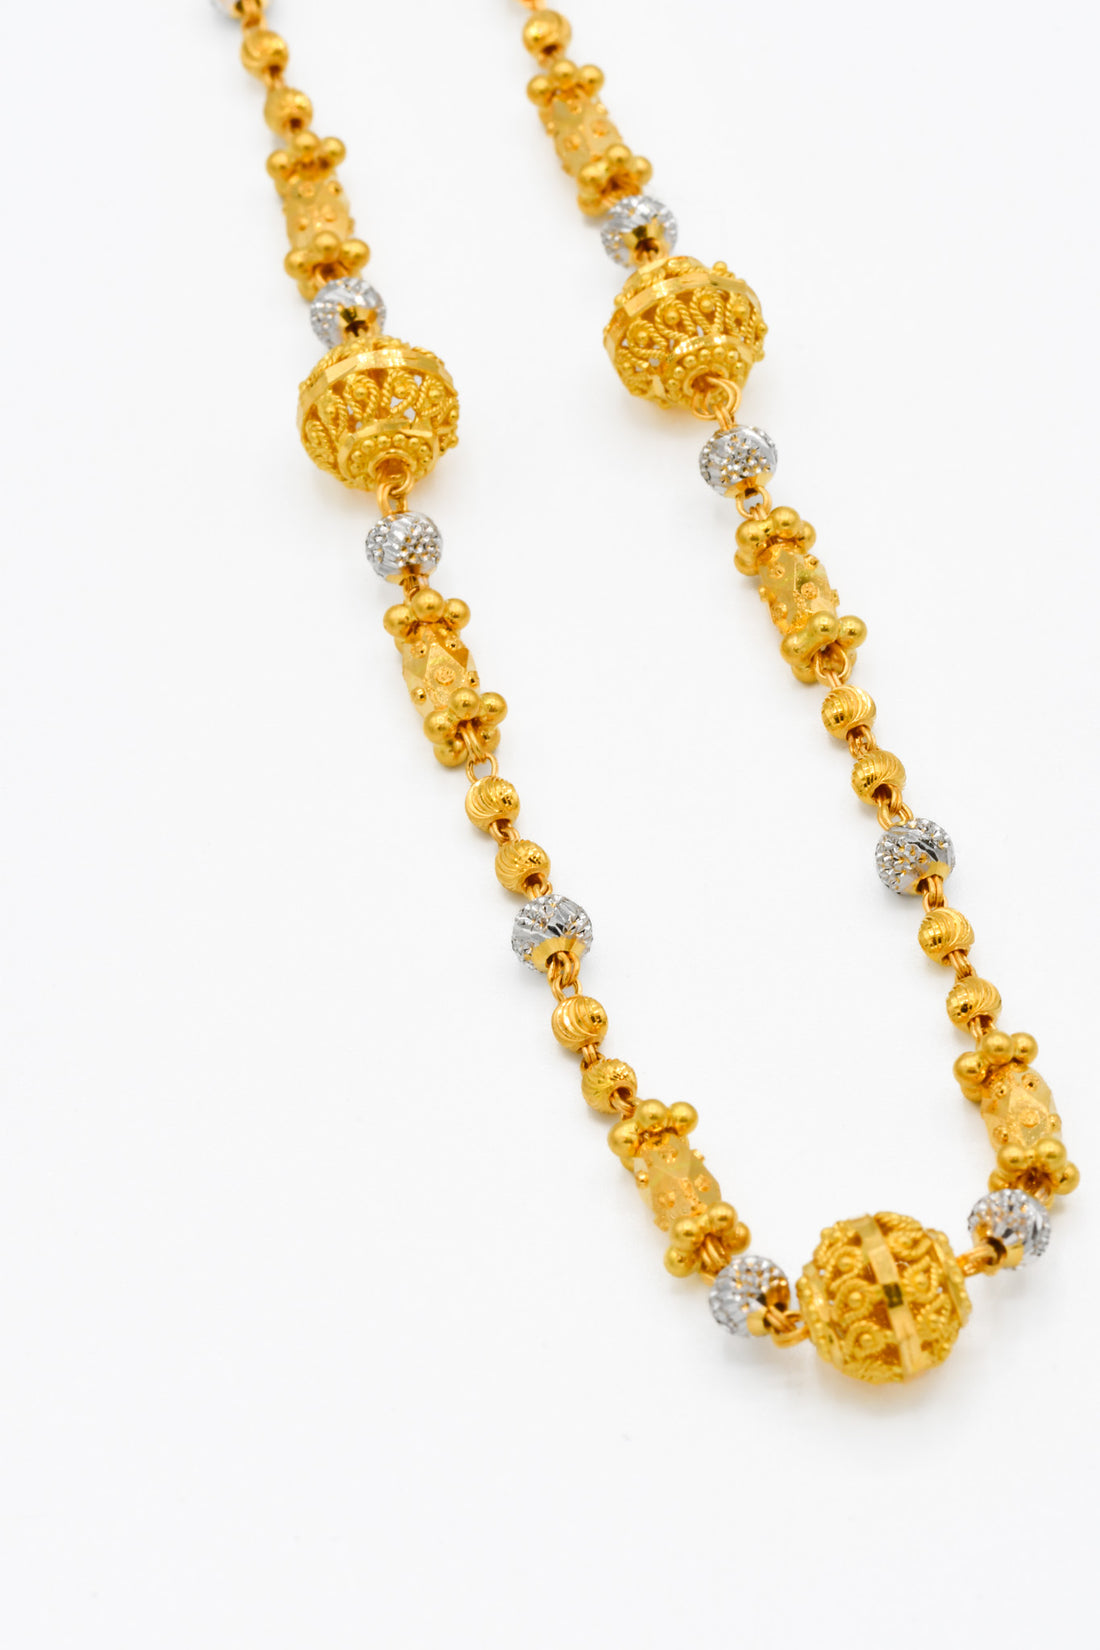 22ct Gold Two Tone Ball Long Fancy Chain - Roop Darshan